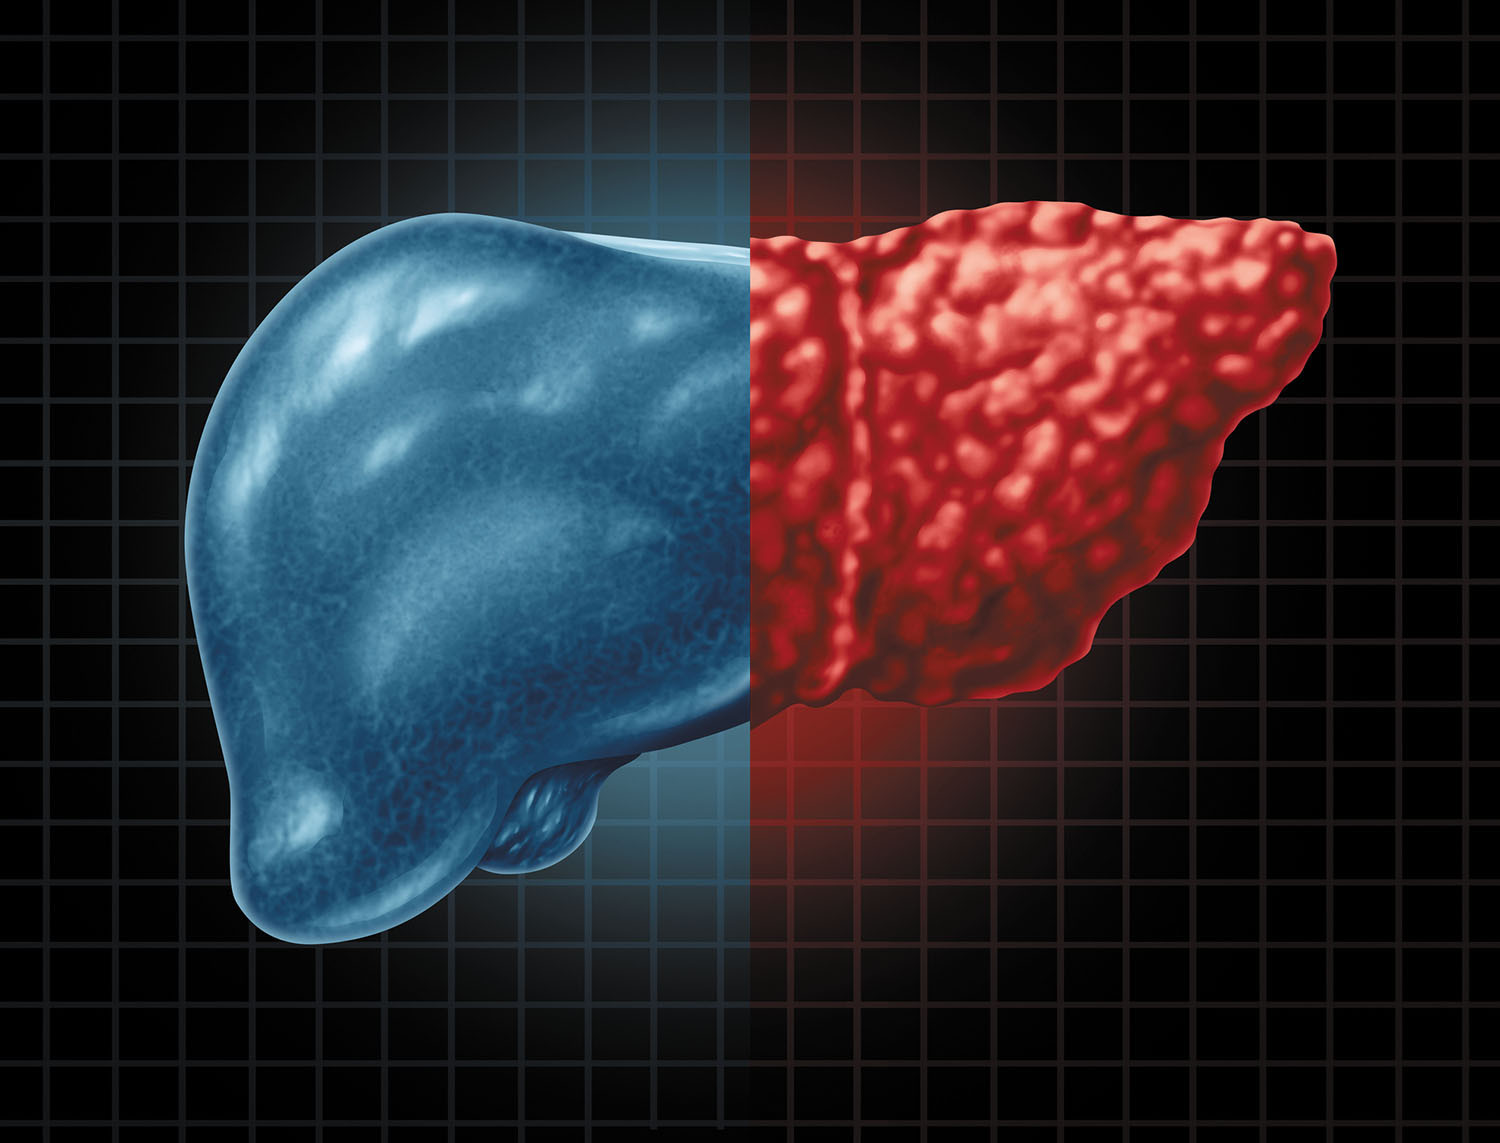 photo illustration using medical imaging showing a human liver, the left half is healthy and is tinted blue while the right half shows fatty liver disease and is tinted red